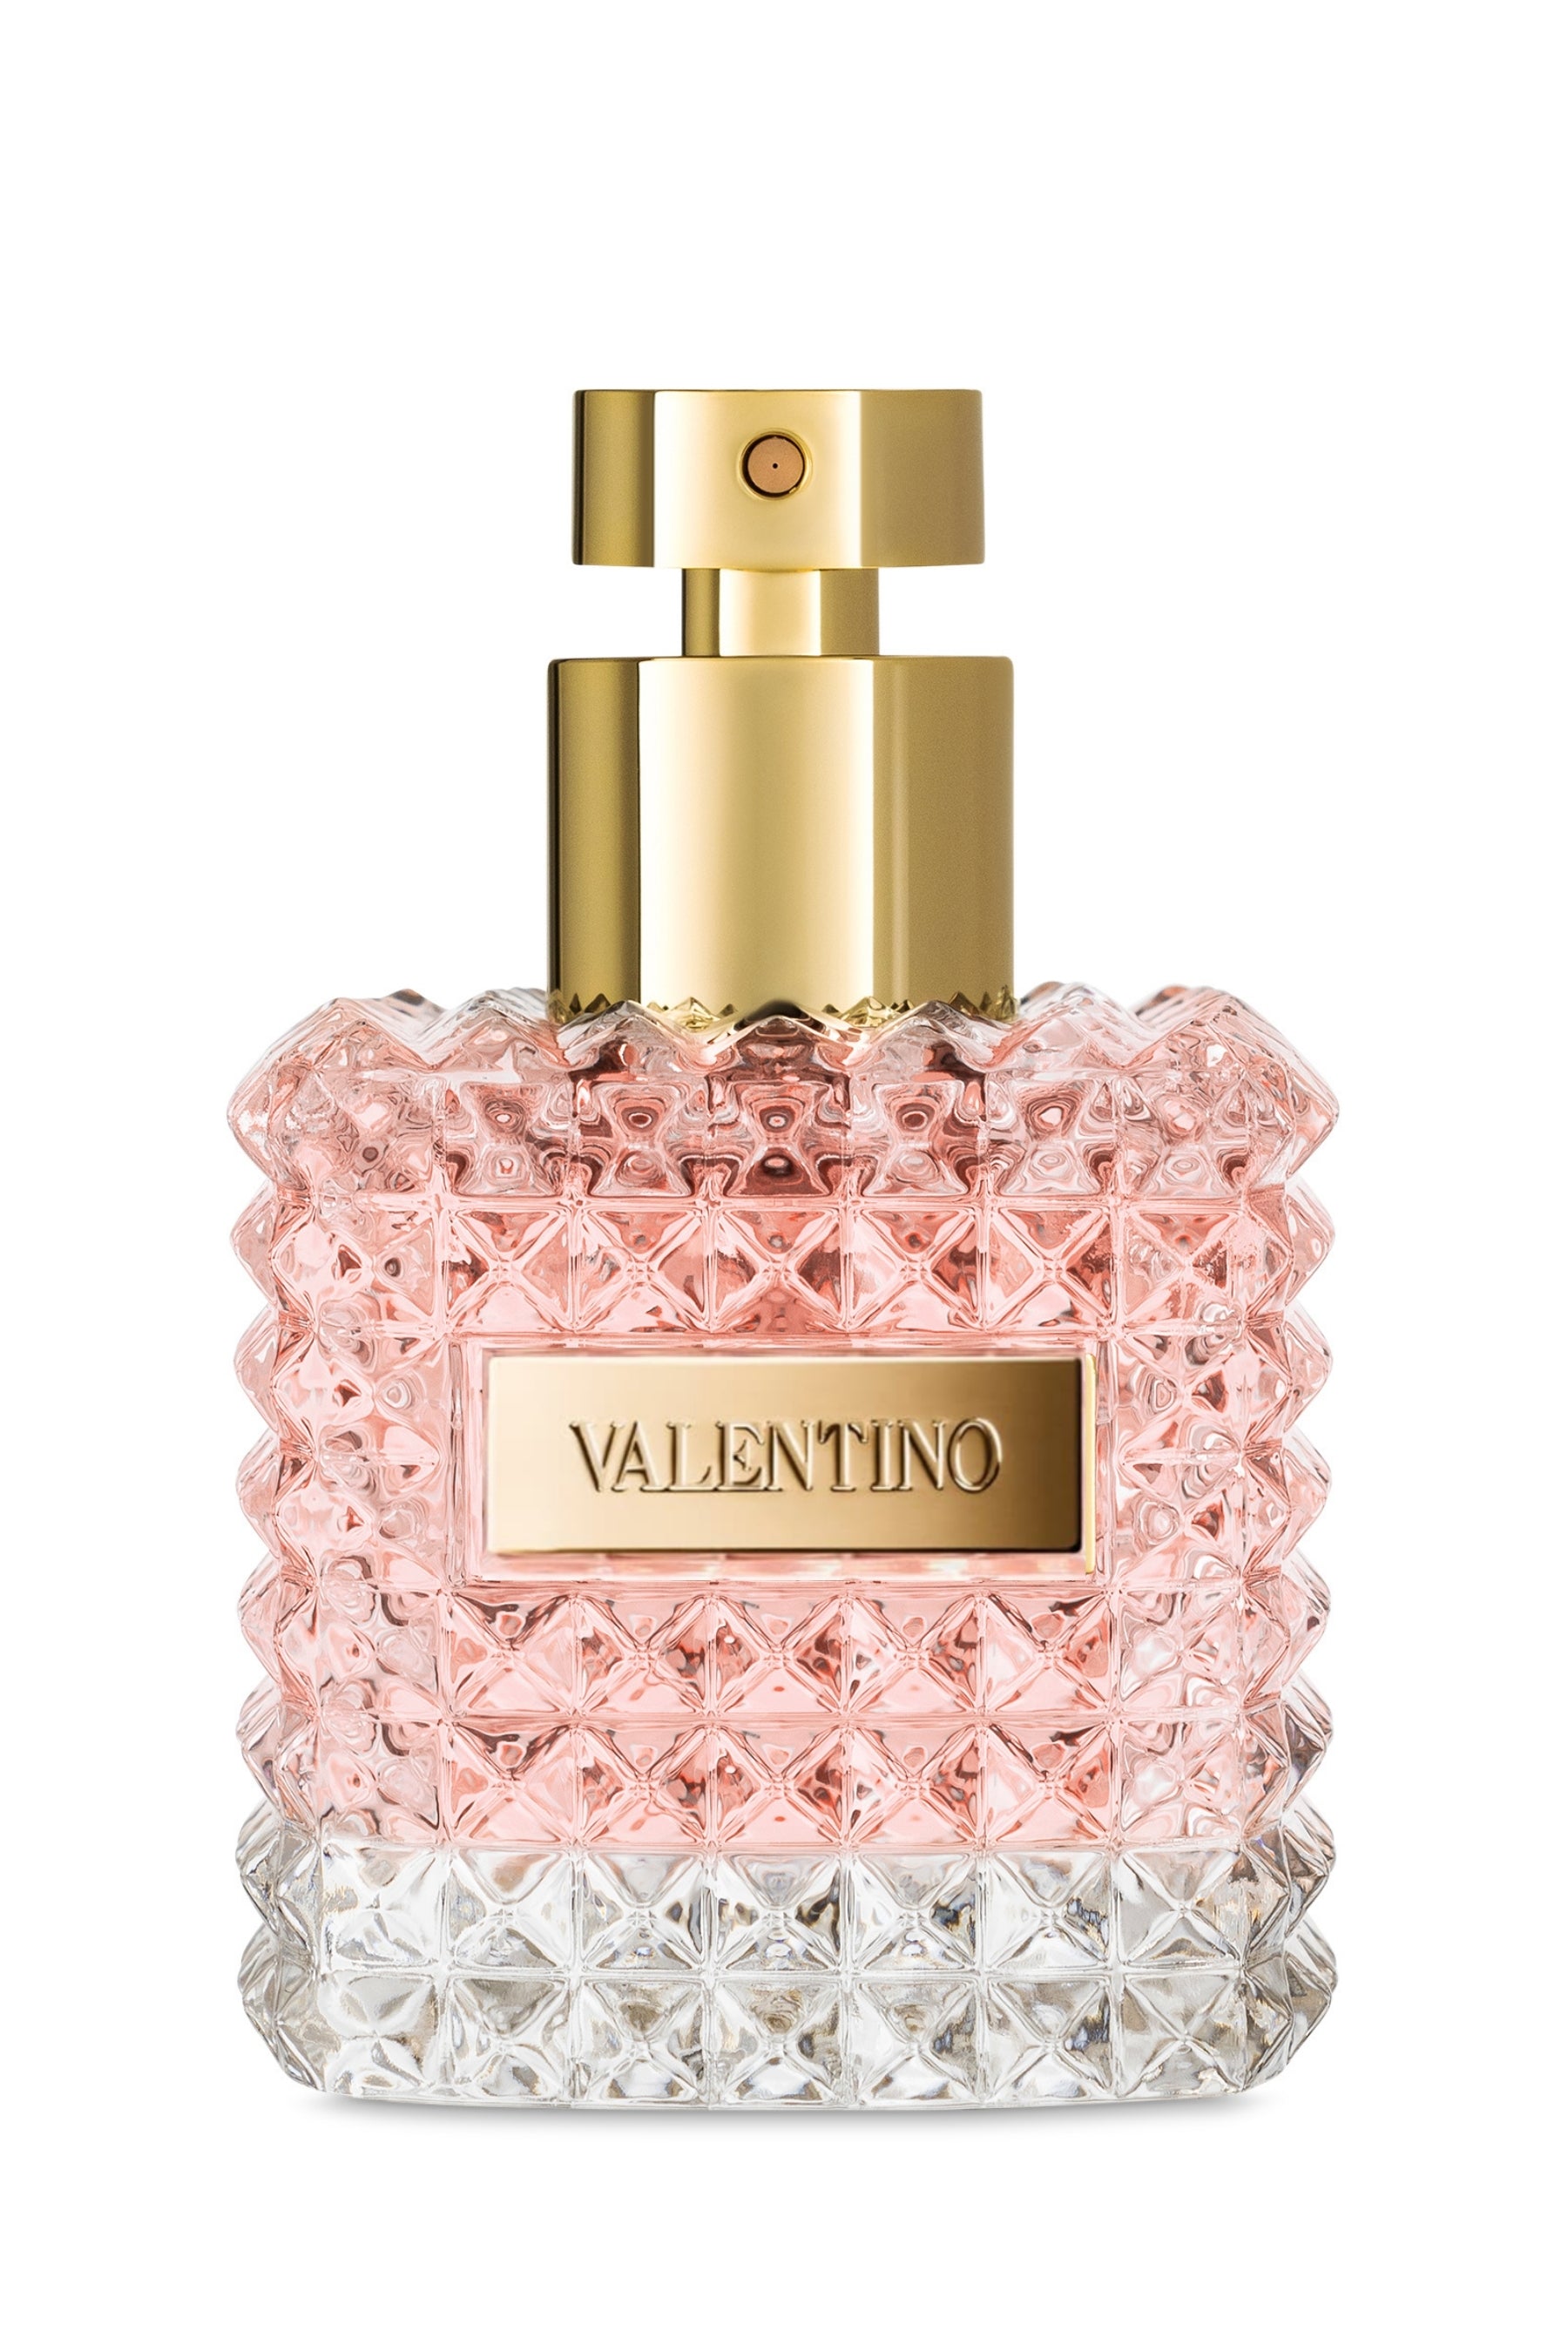 Stramme komme Zoologisk have Donna Perfume by Valentino | REBL Scents